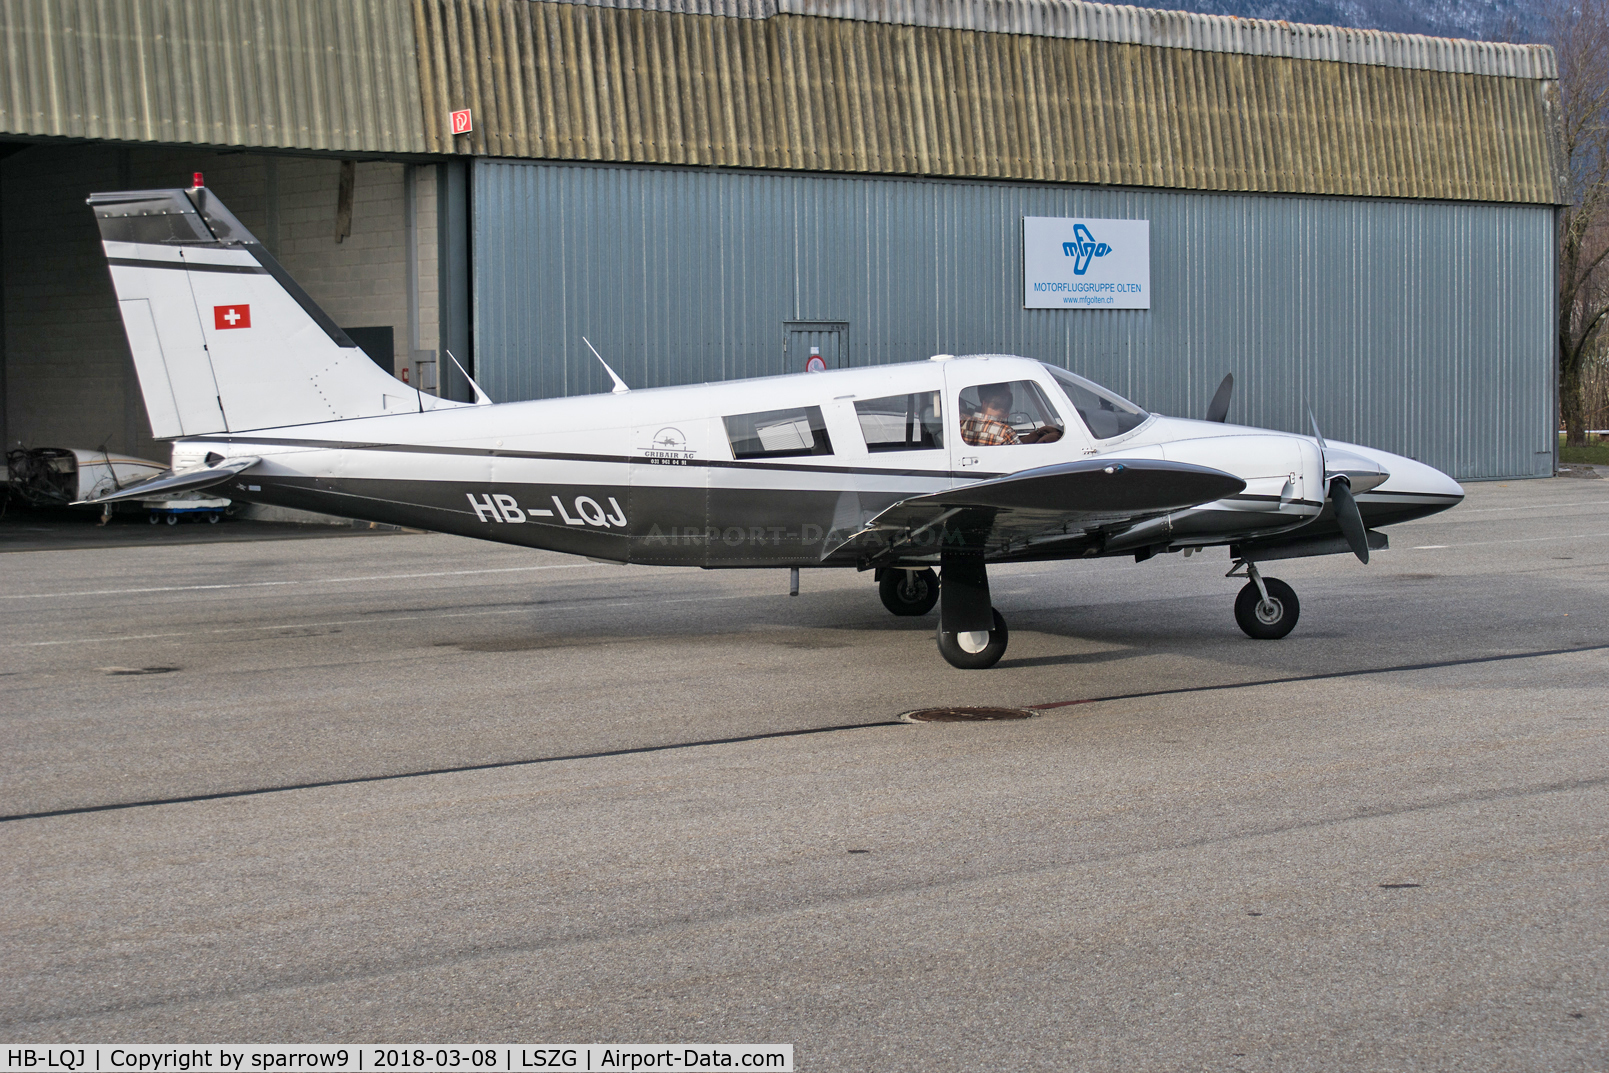 HB-LQJ, 1973 Piper PA-34-200 C/N 34-7350164, At Grenchen.HB-registered from 1988-03-11.